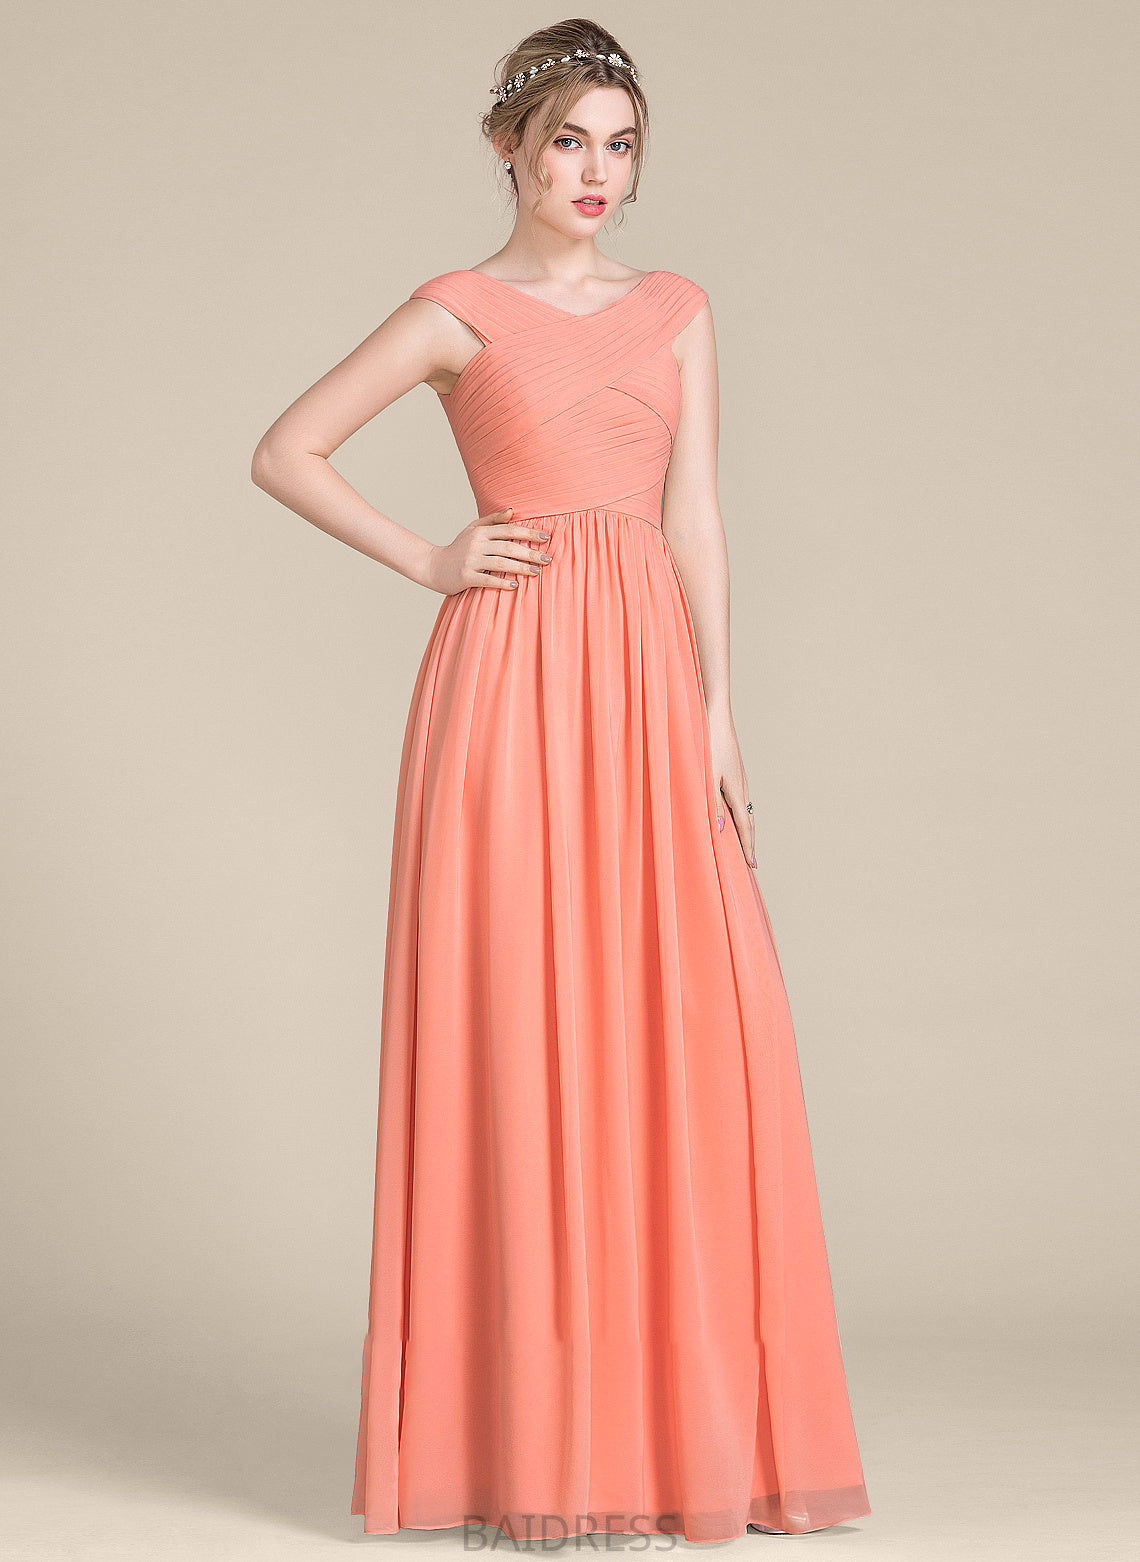 V-neck Prom Dresses Asia Floor-Length Ruffle Ball-Gown/Princess With Chiffon